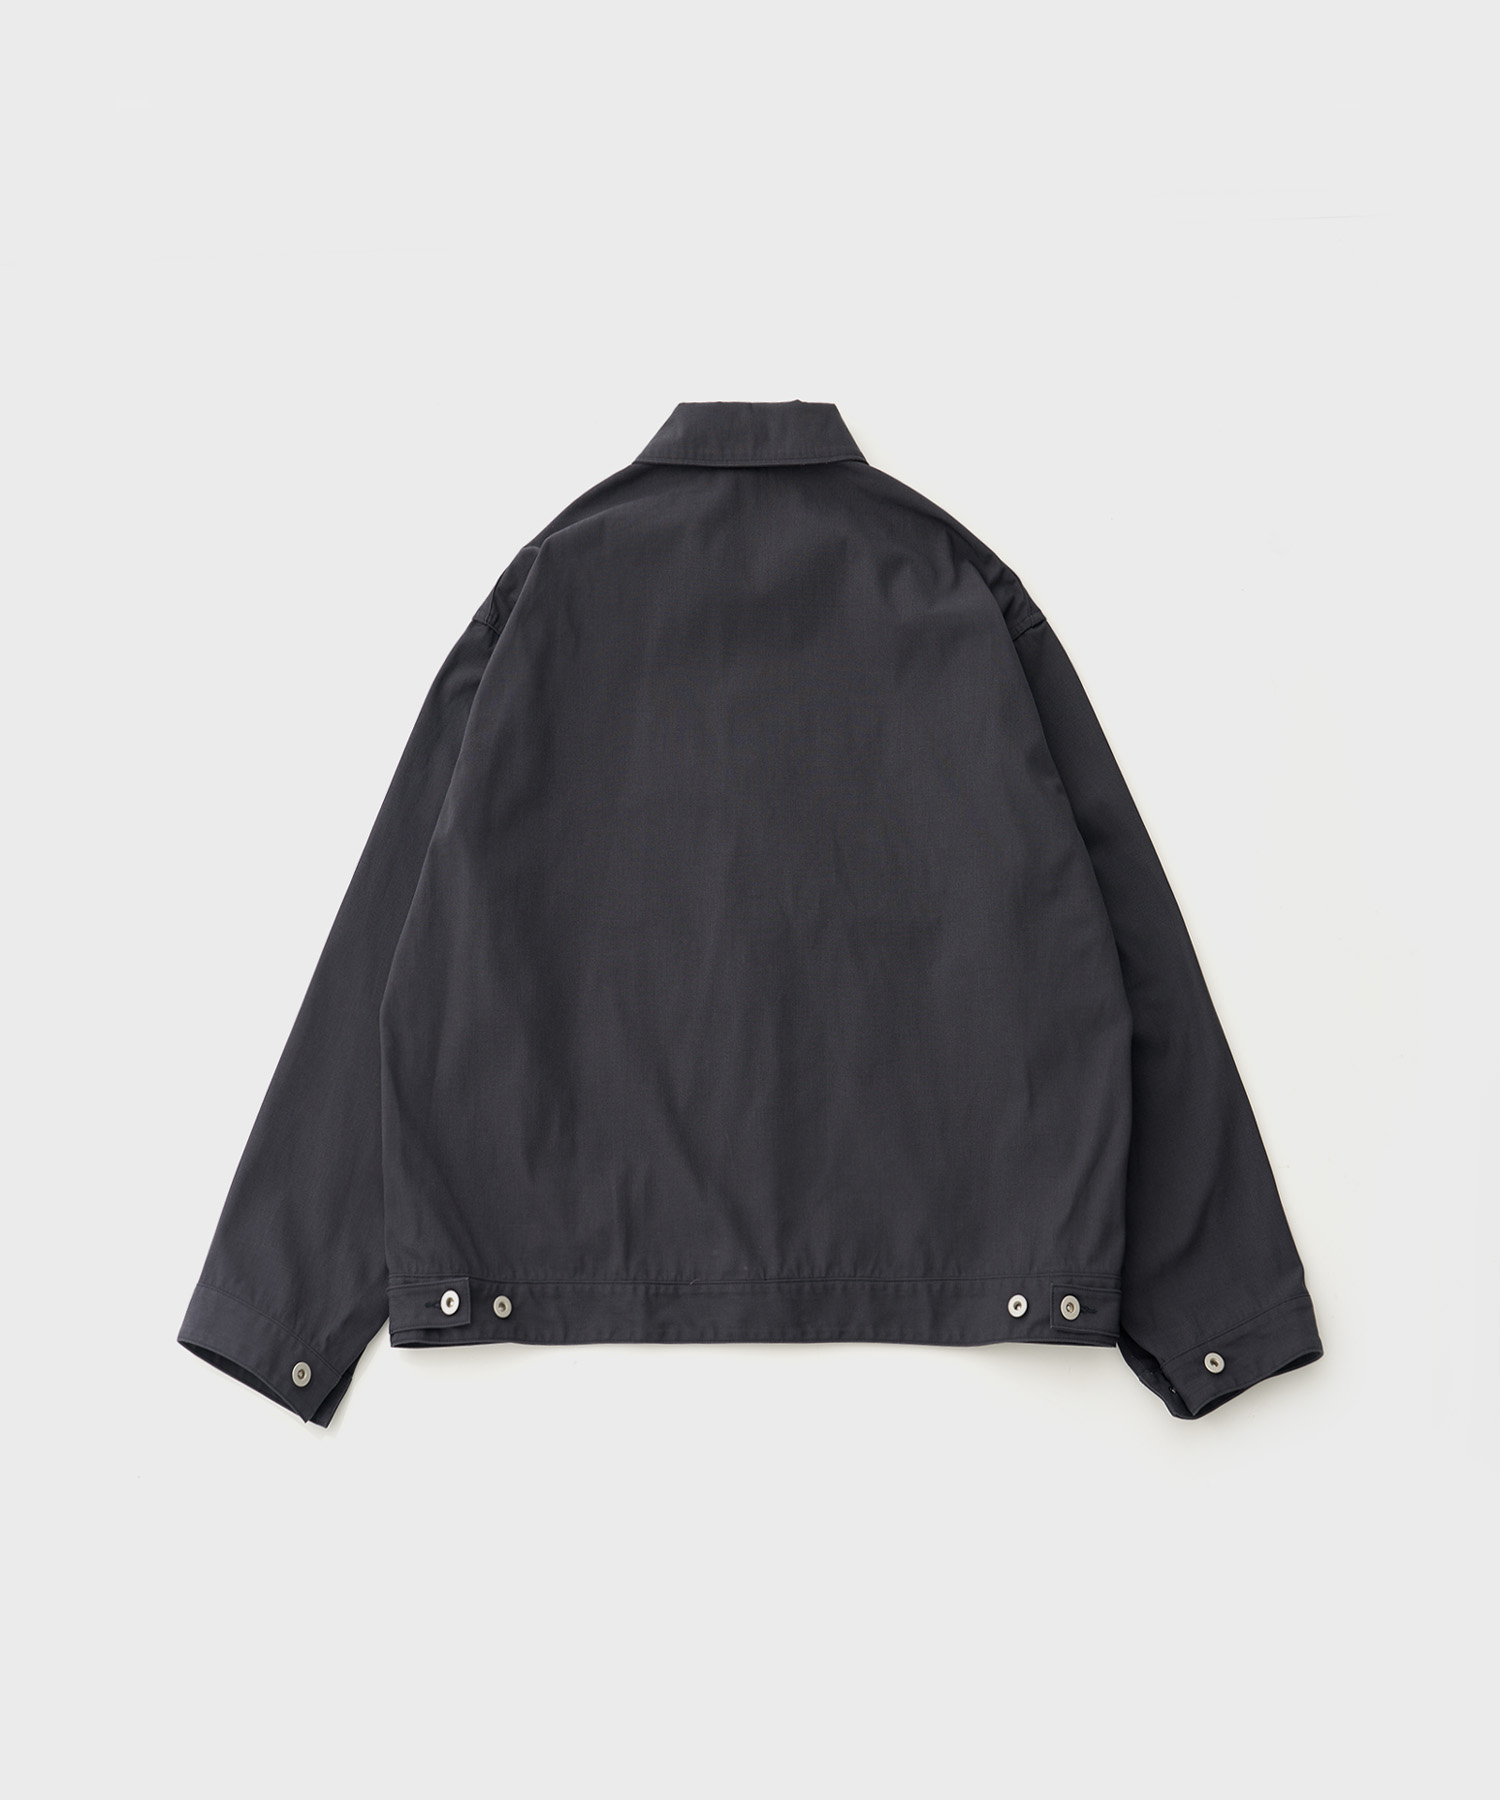 (w) Org Cotton / Recycle Polyester Twill Blouson (Navy)